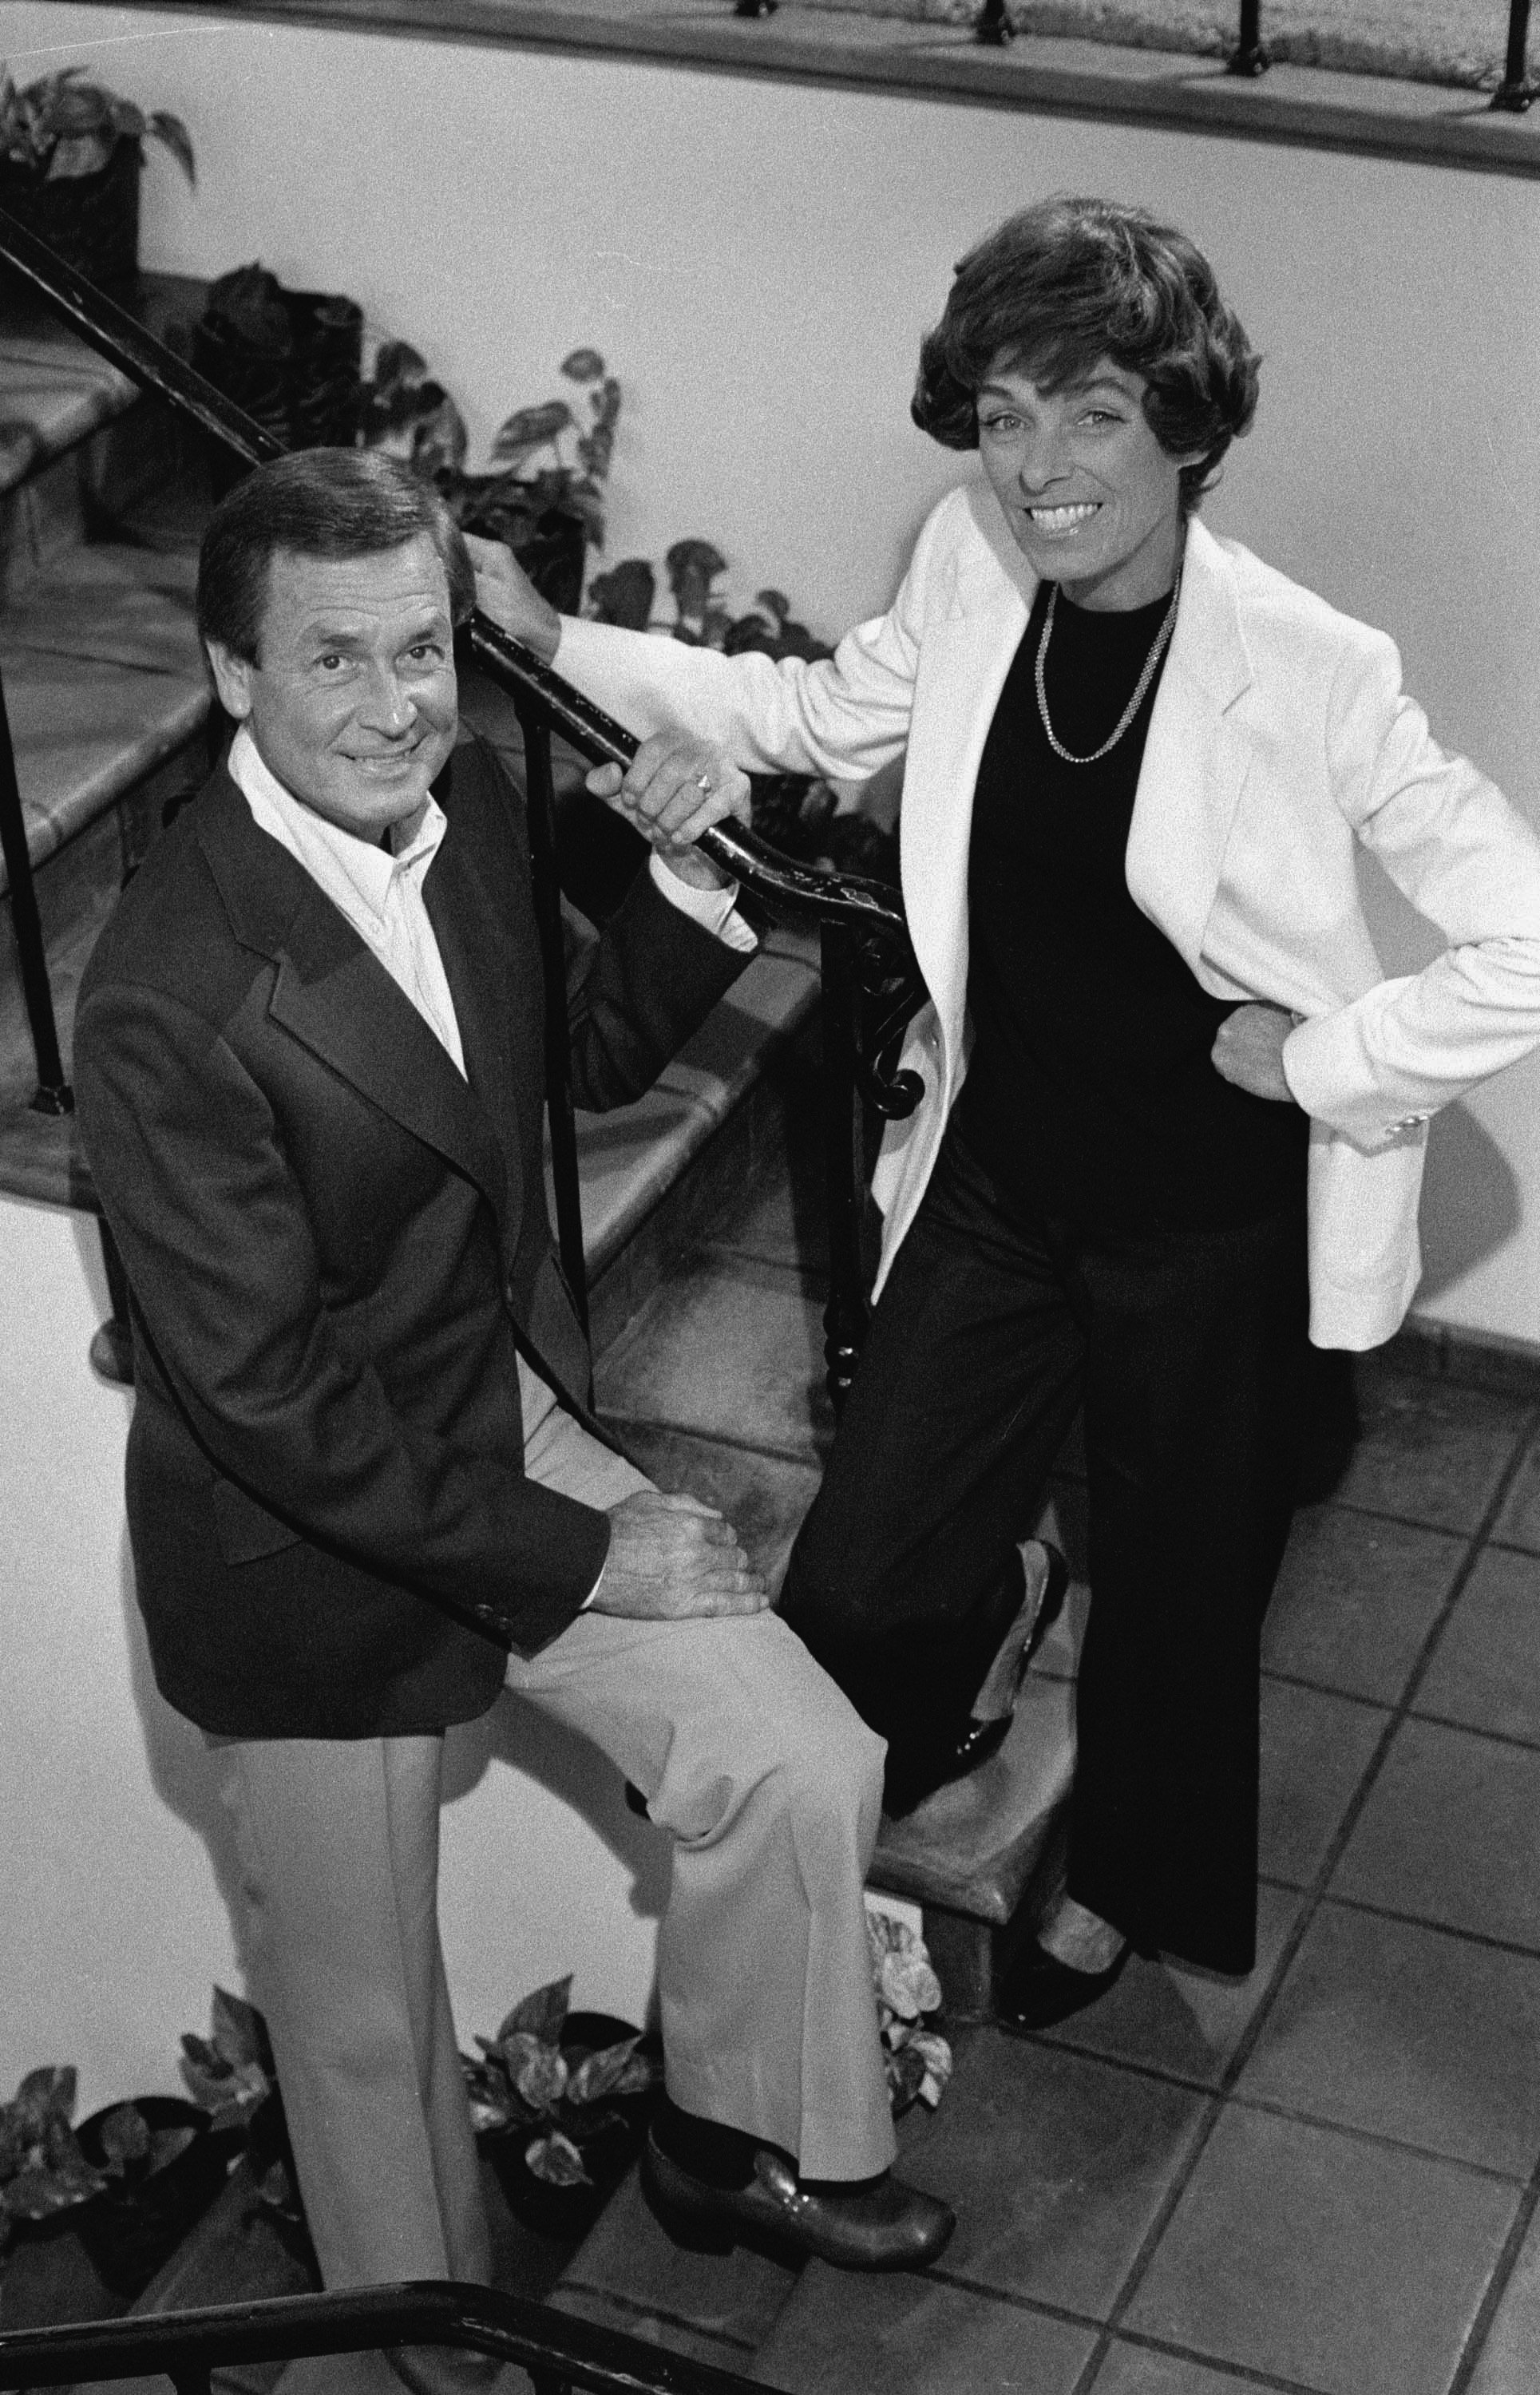 American game show host Bob Barker and his wife Dorothy Jo (1824 - 1981) pose on the stairs of their house, November 4, 1977. | Source: Getty Images